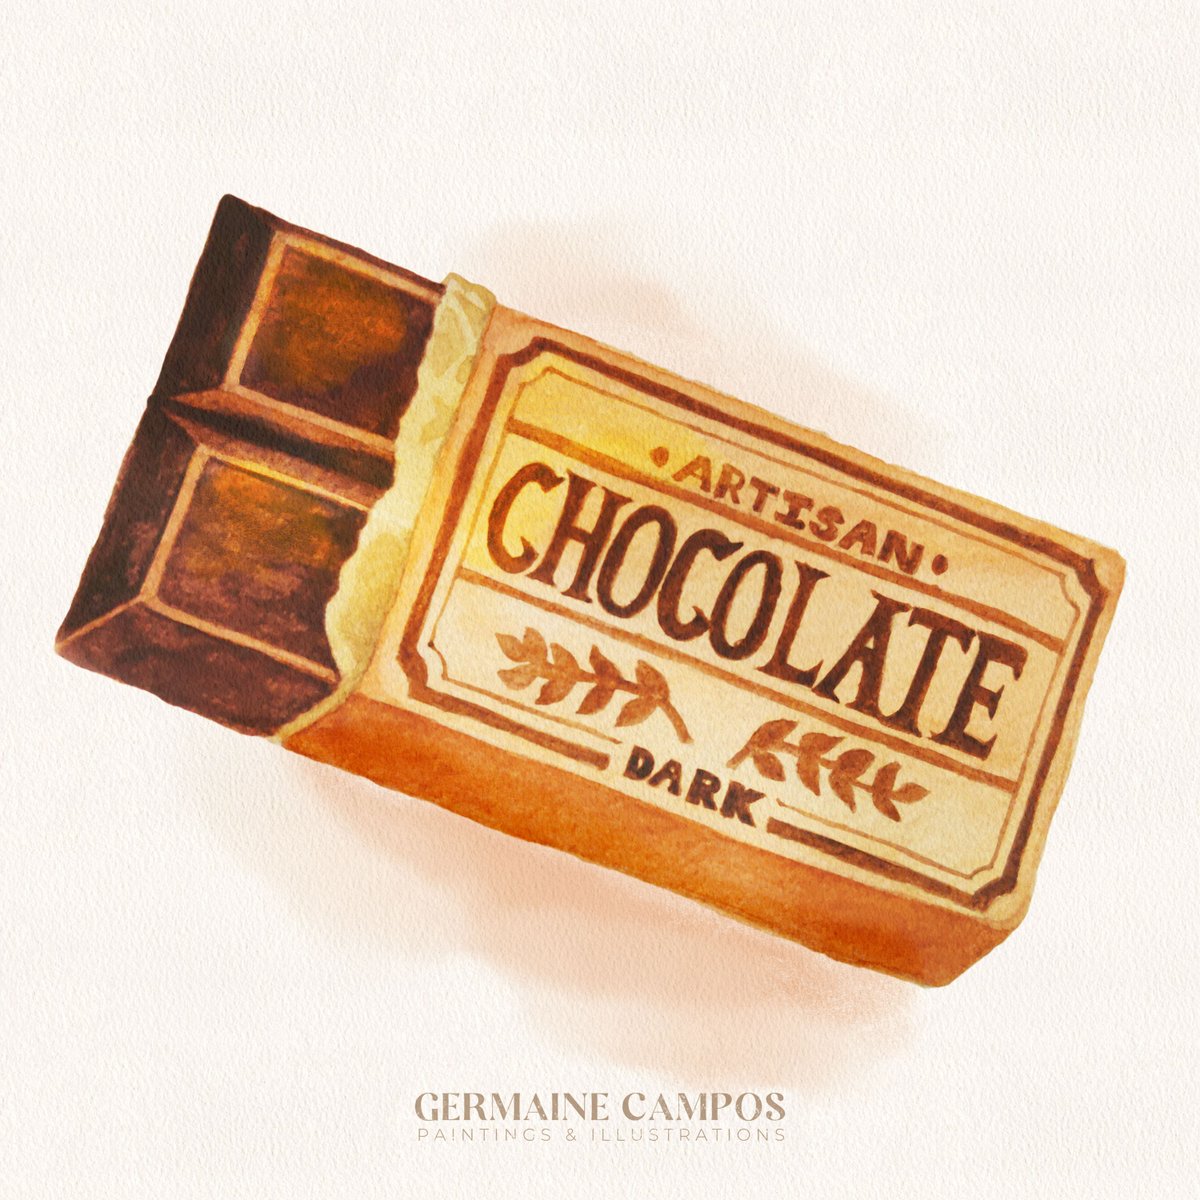 Send chocolates. Preferably dark.

The crisp edge of the bar reminds me of that crunchy sensation when you bite into it. 

#chocolatebar #artisanchocolate #rustic #watercolorillustration #watercolorpainting #Watercolour  #darkchocolate #artwork #artph